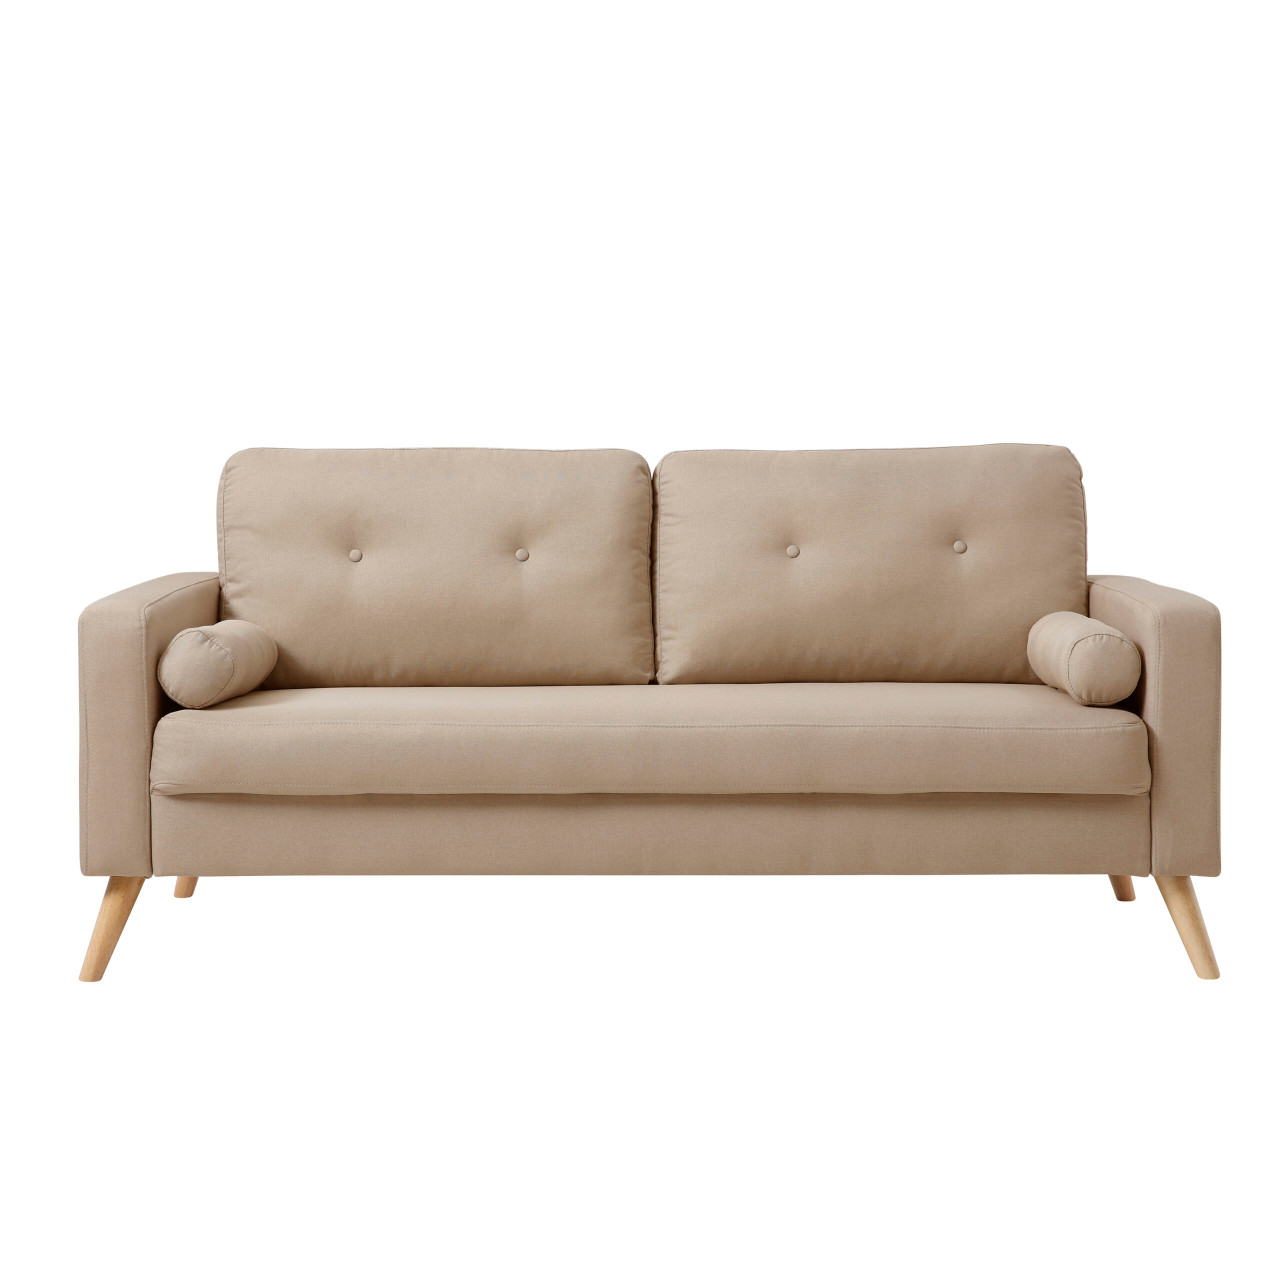 The Alvin Beige Mid Century Modern Sofa at Furniture Express Hawaii-  Hawaii's largest online source for Furniture! All items ship to the  Hawaiian Islands. Free Shipping to Hawaii. Serving Honolulu, Oahu, Maui